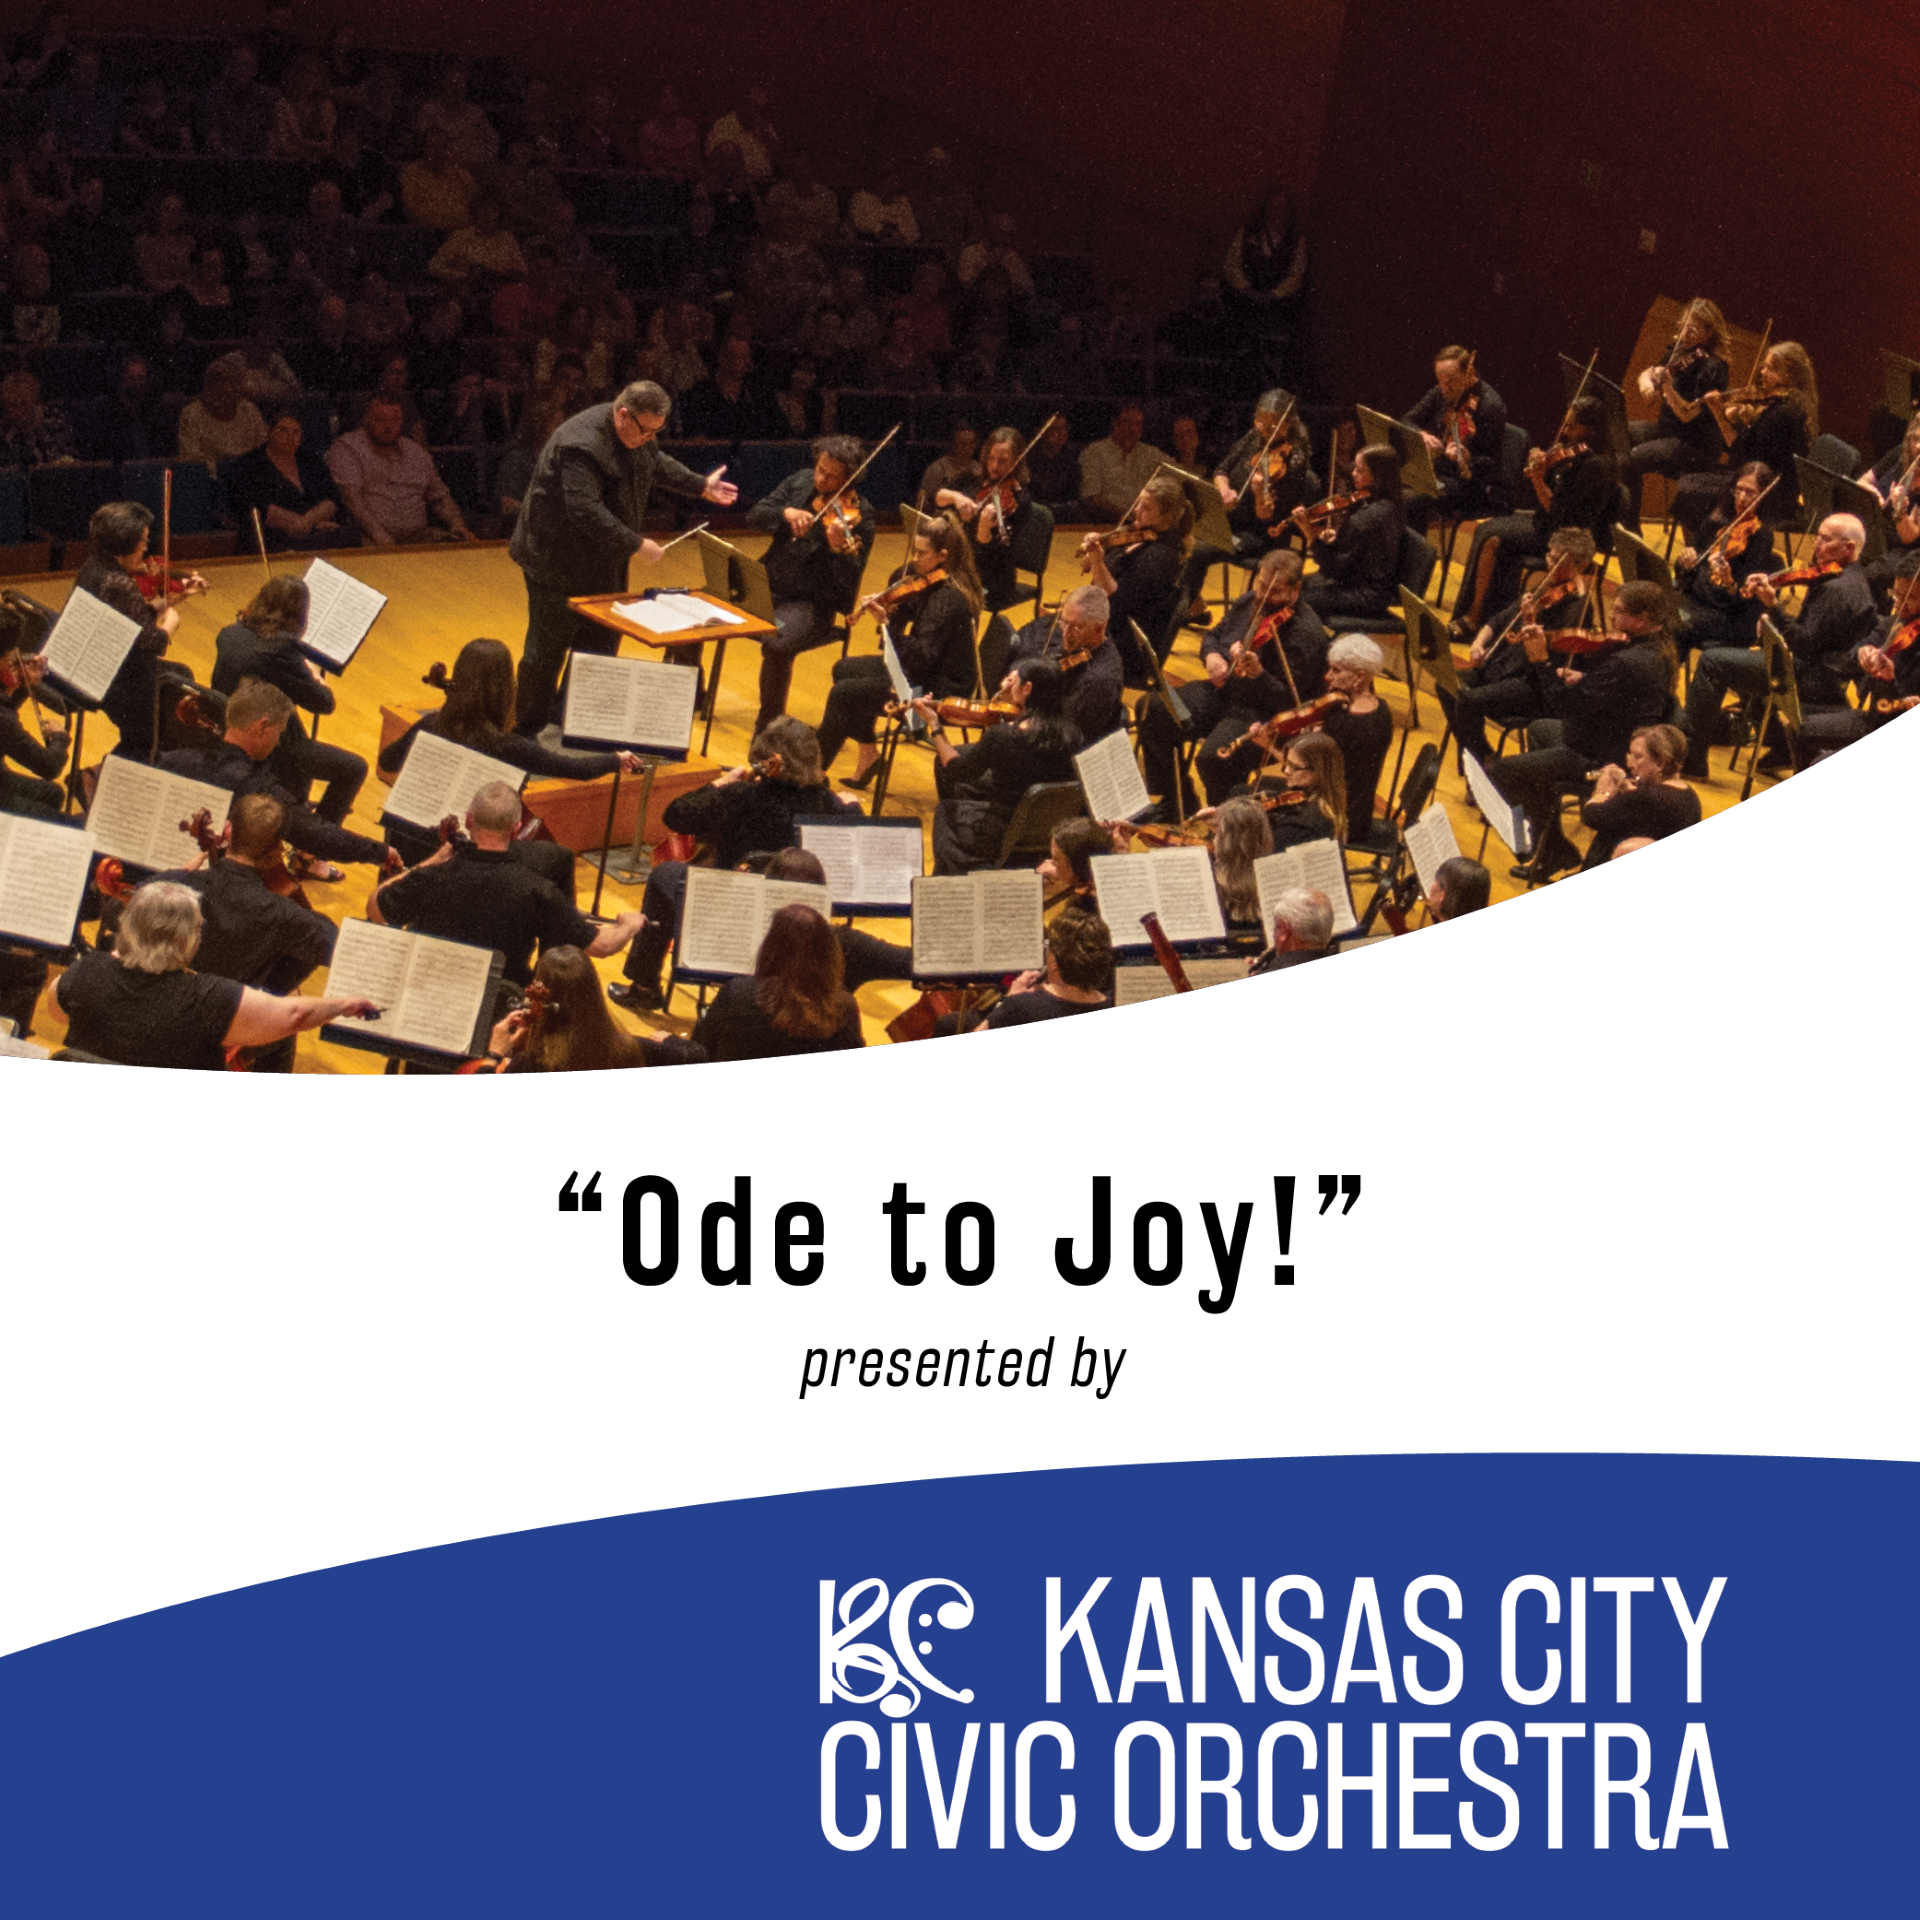 <em>Kansas City Civic Orchestra Presents</em><br>

Beethoven’s Ninth Symphony

With the William Jewell Cardinal Voices